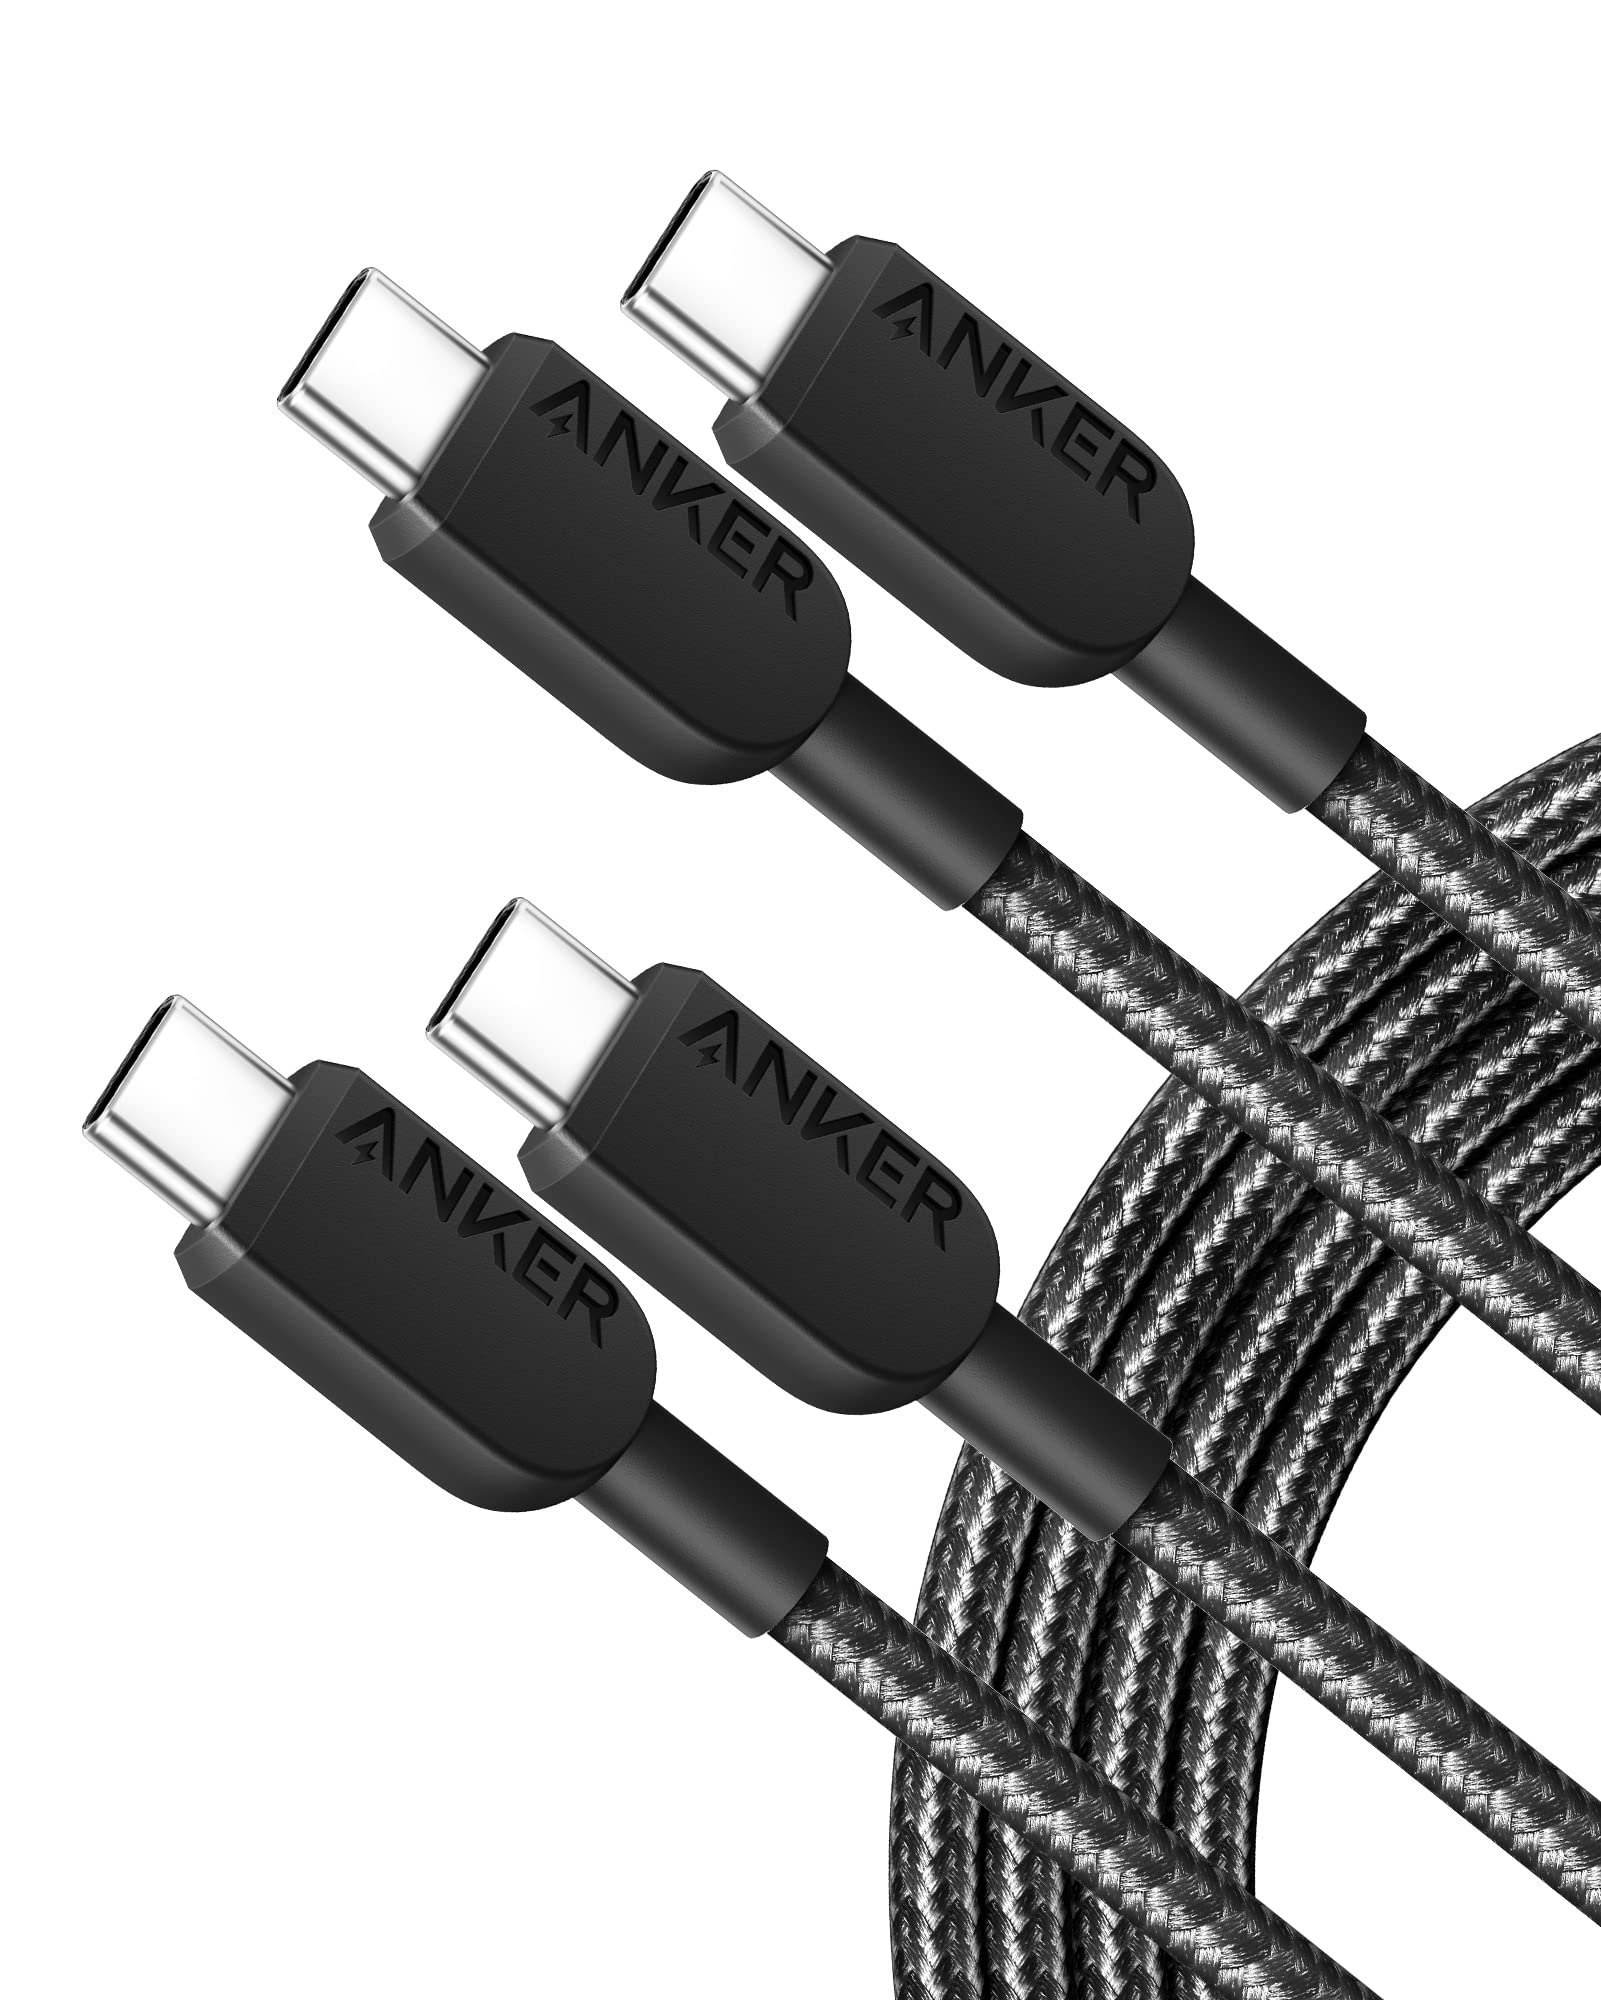 Anker  2-Pack 6' 310 USB-C to USB-C 60W/3A Charging Cable $6.50 + Free Shipping w/ Prime or orders $35+